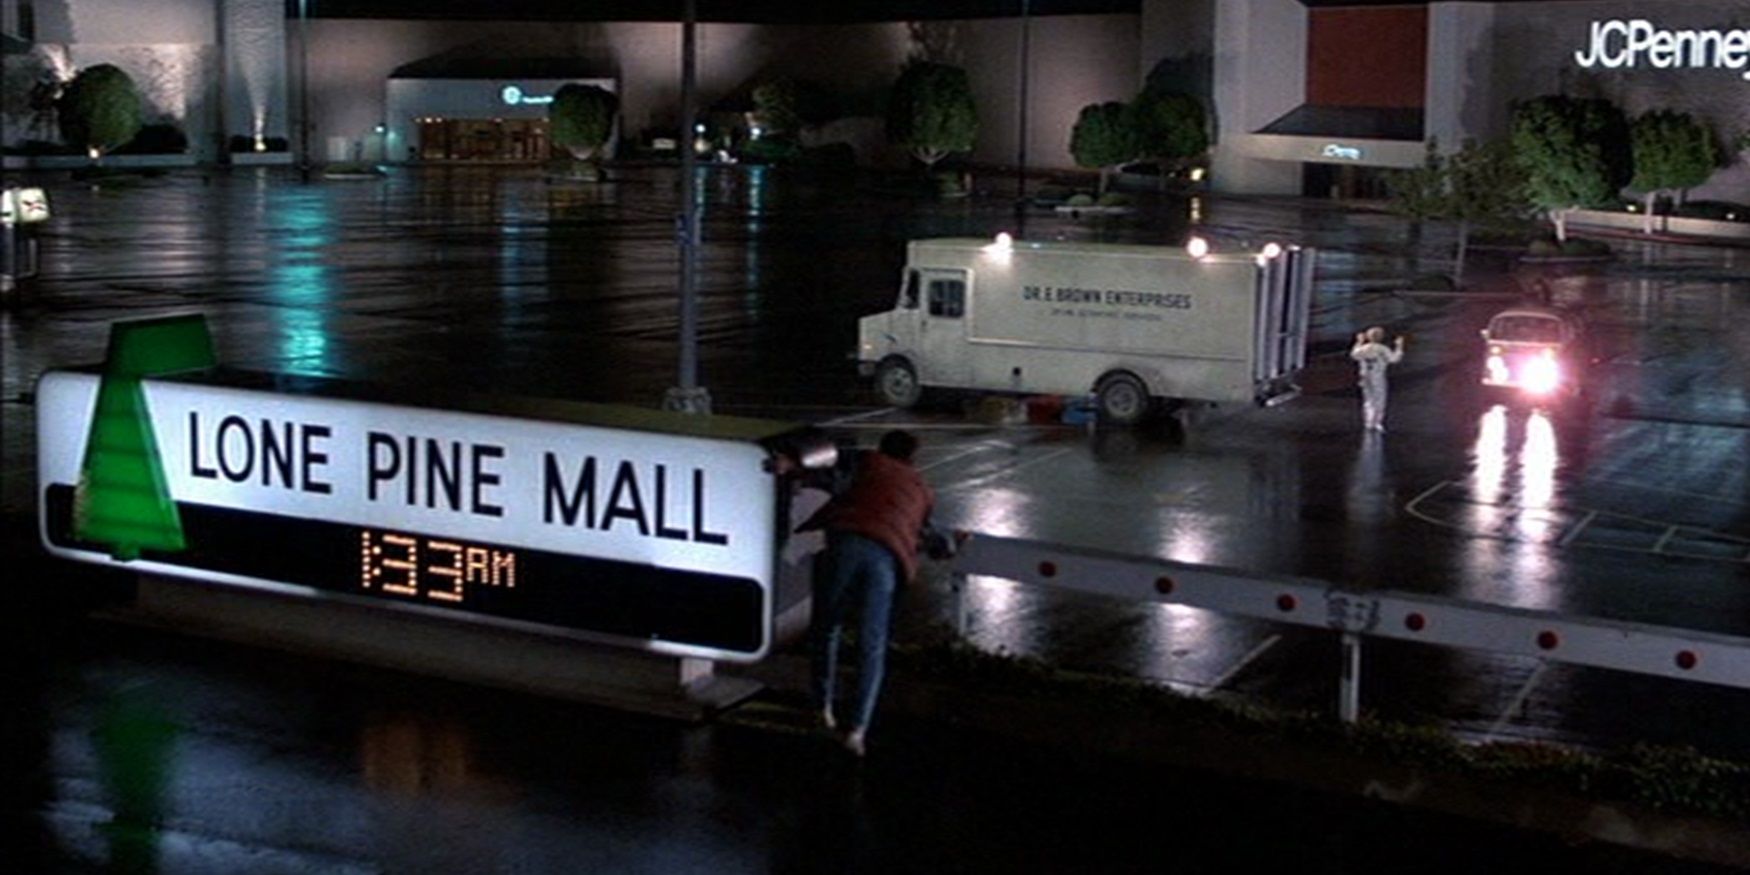 The Lone Pine Mall sign in Back to the Future